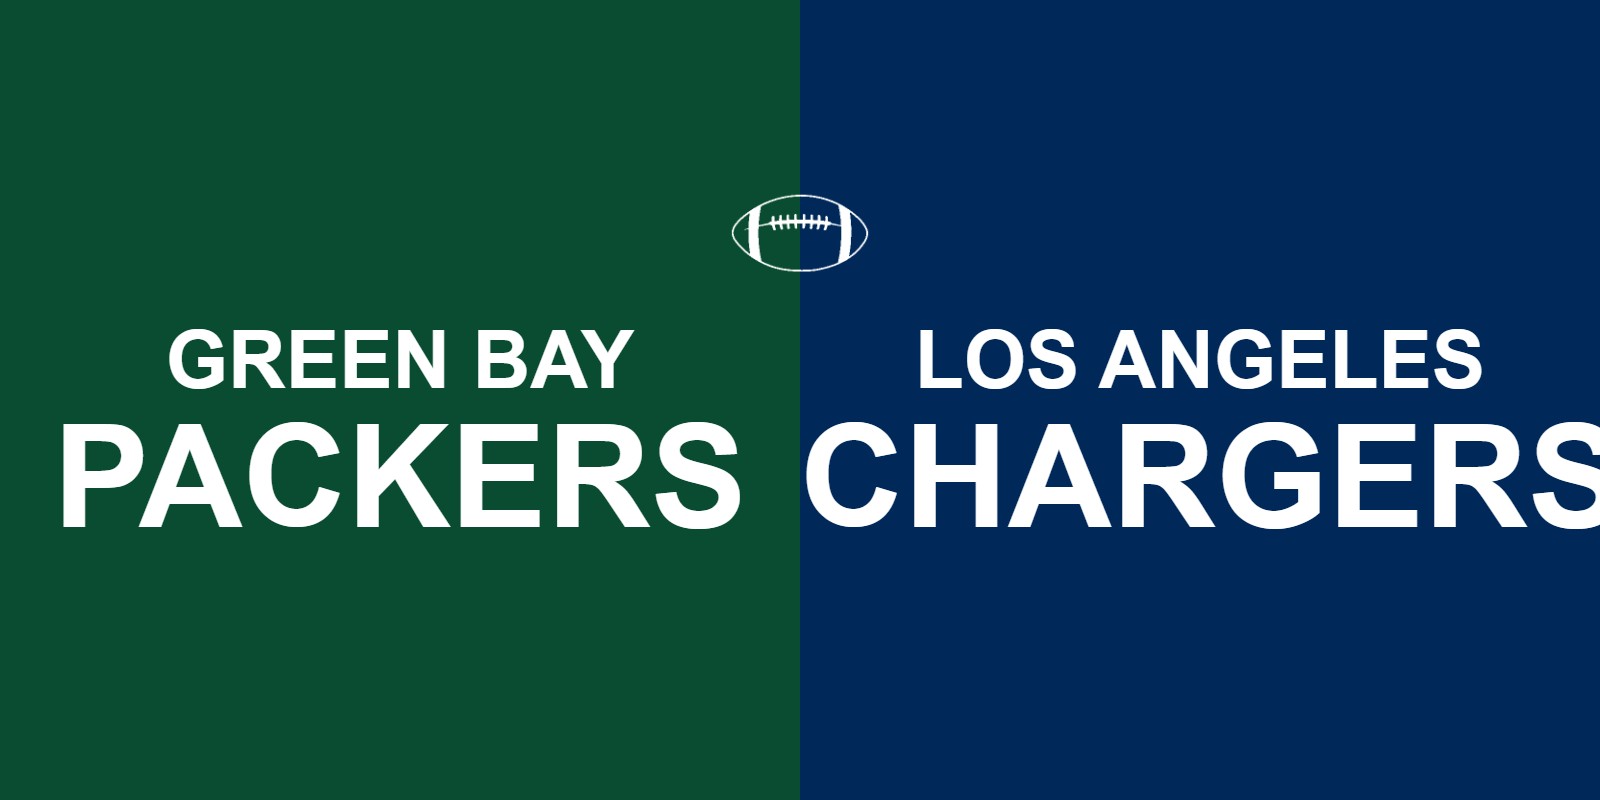 Packers vs Chargers